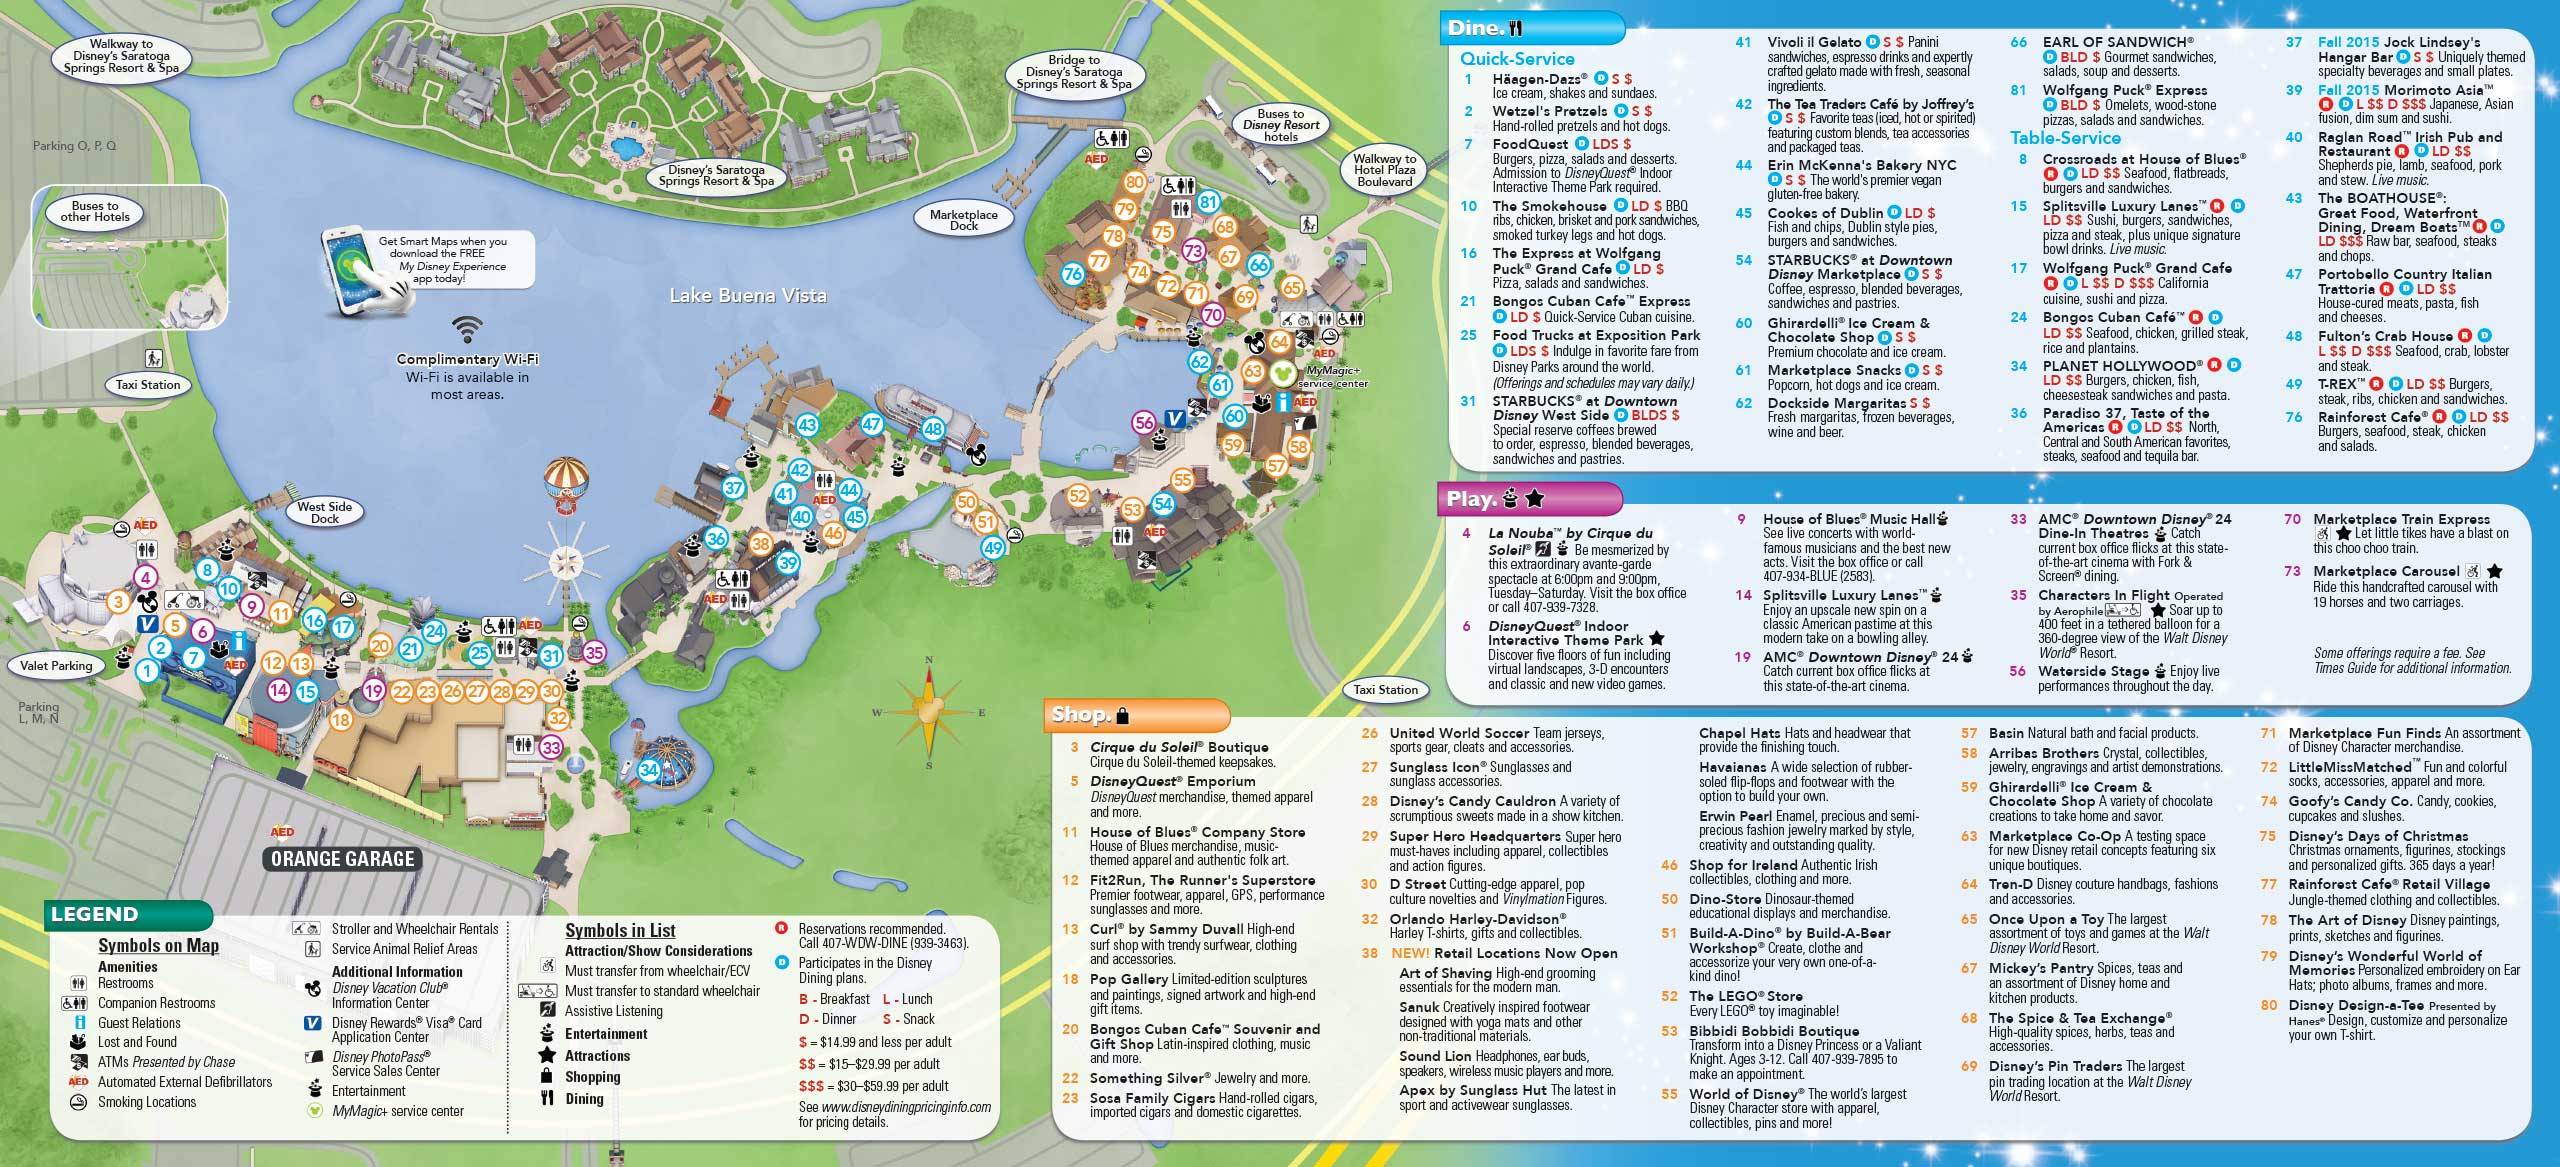 PHOTOS - New Downtown Disney guide map includes Disney Springs name and new restaurants